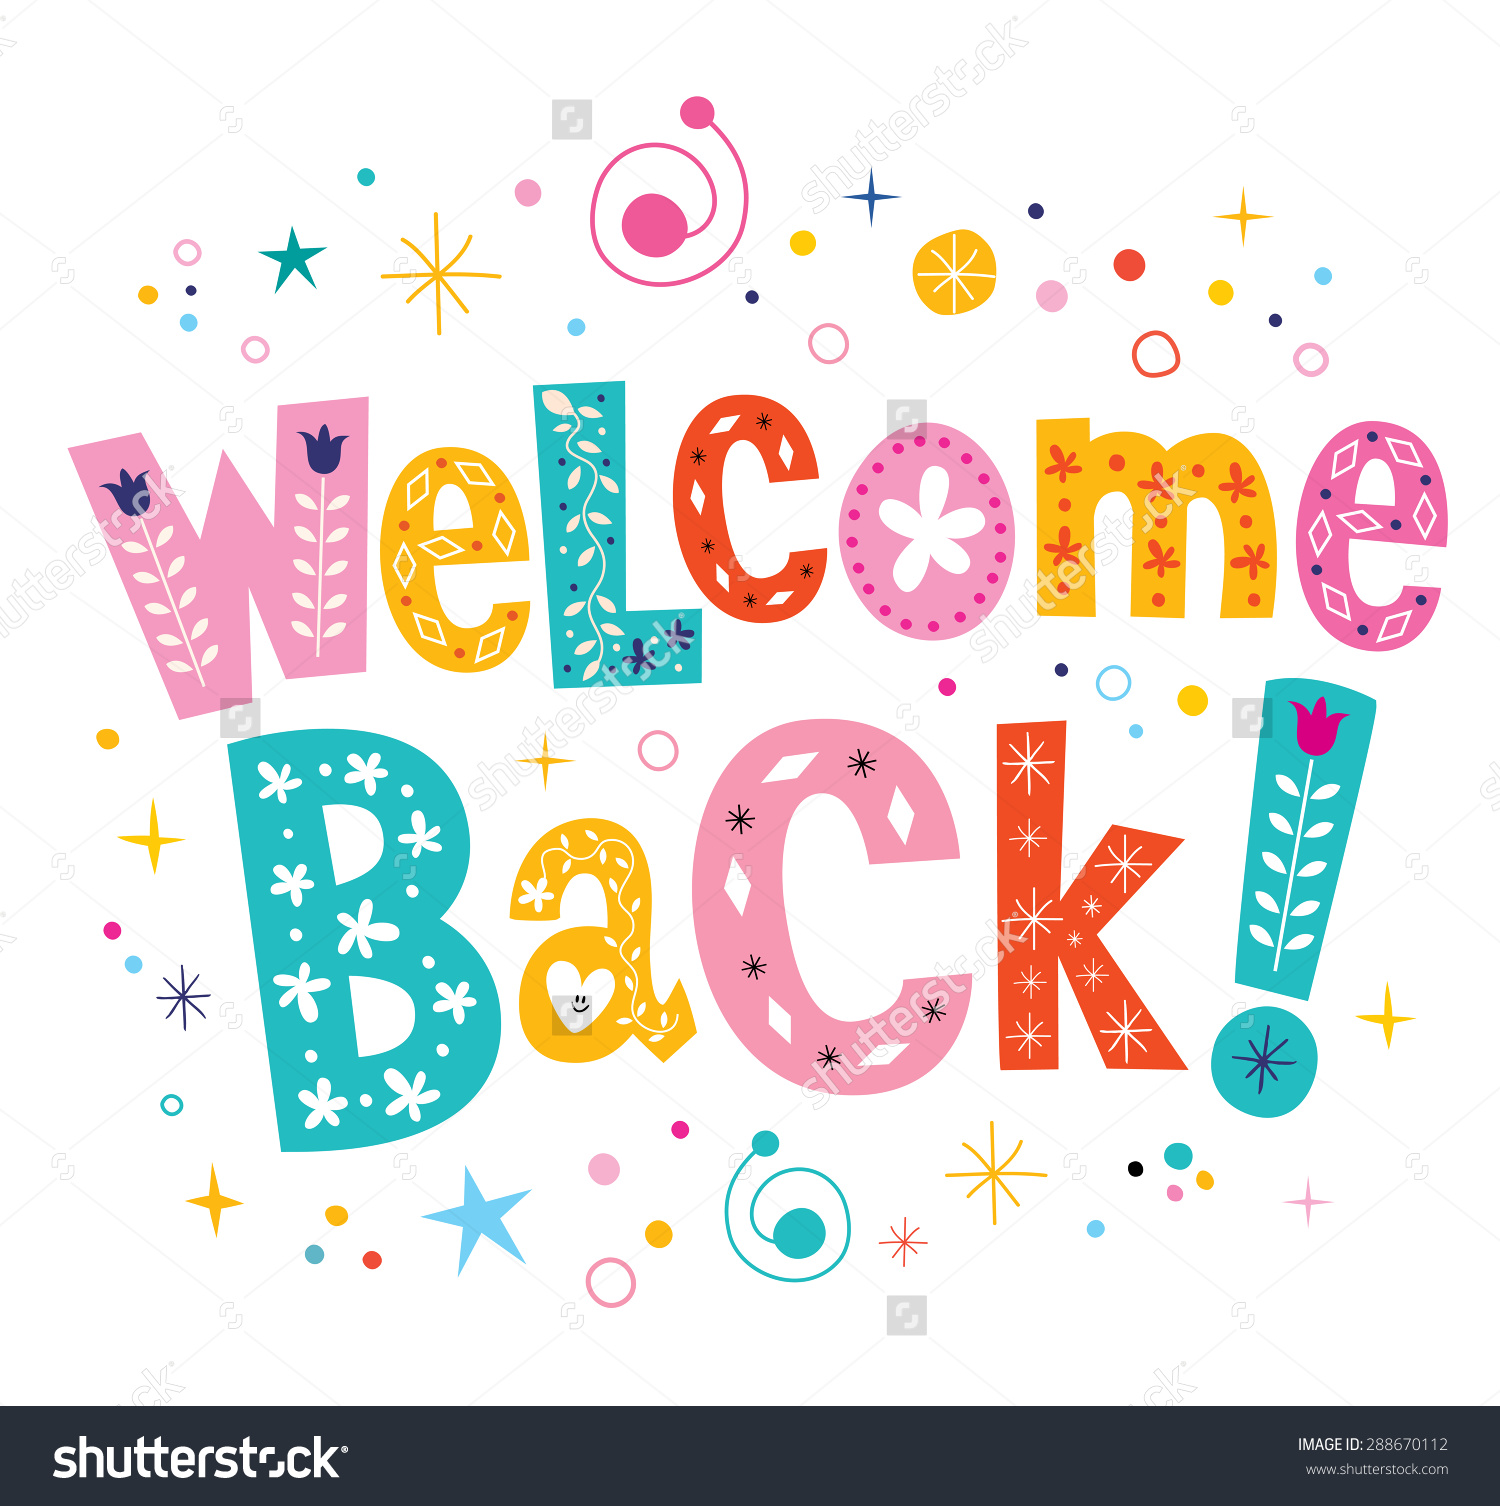 Welcome back clipart animated